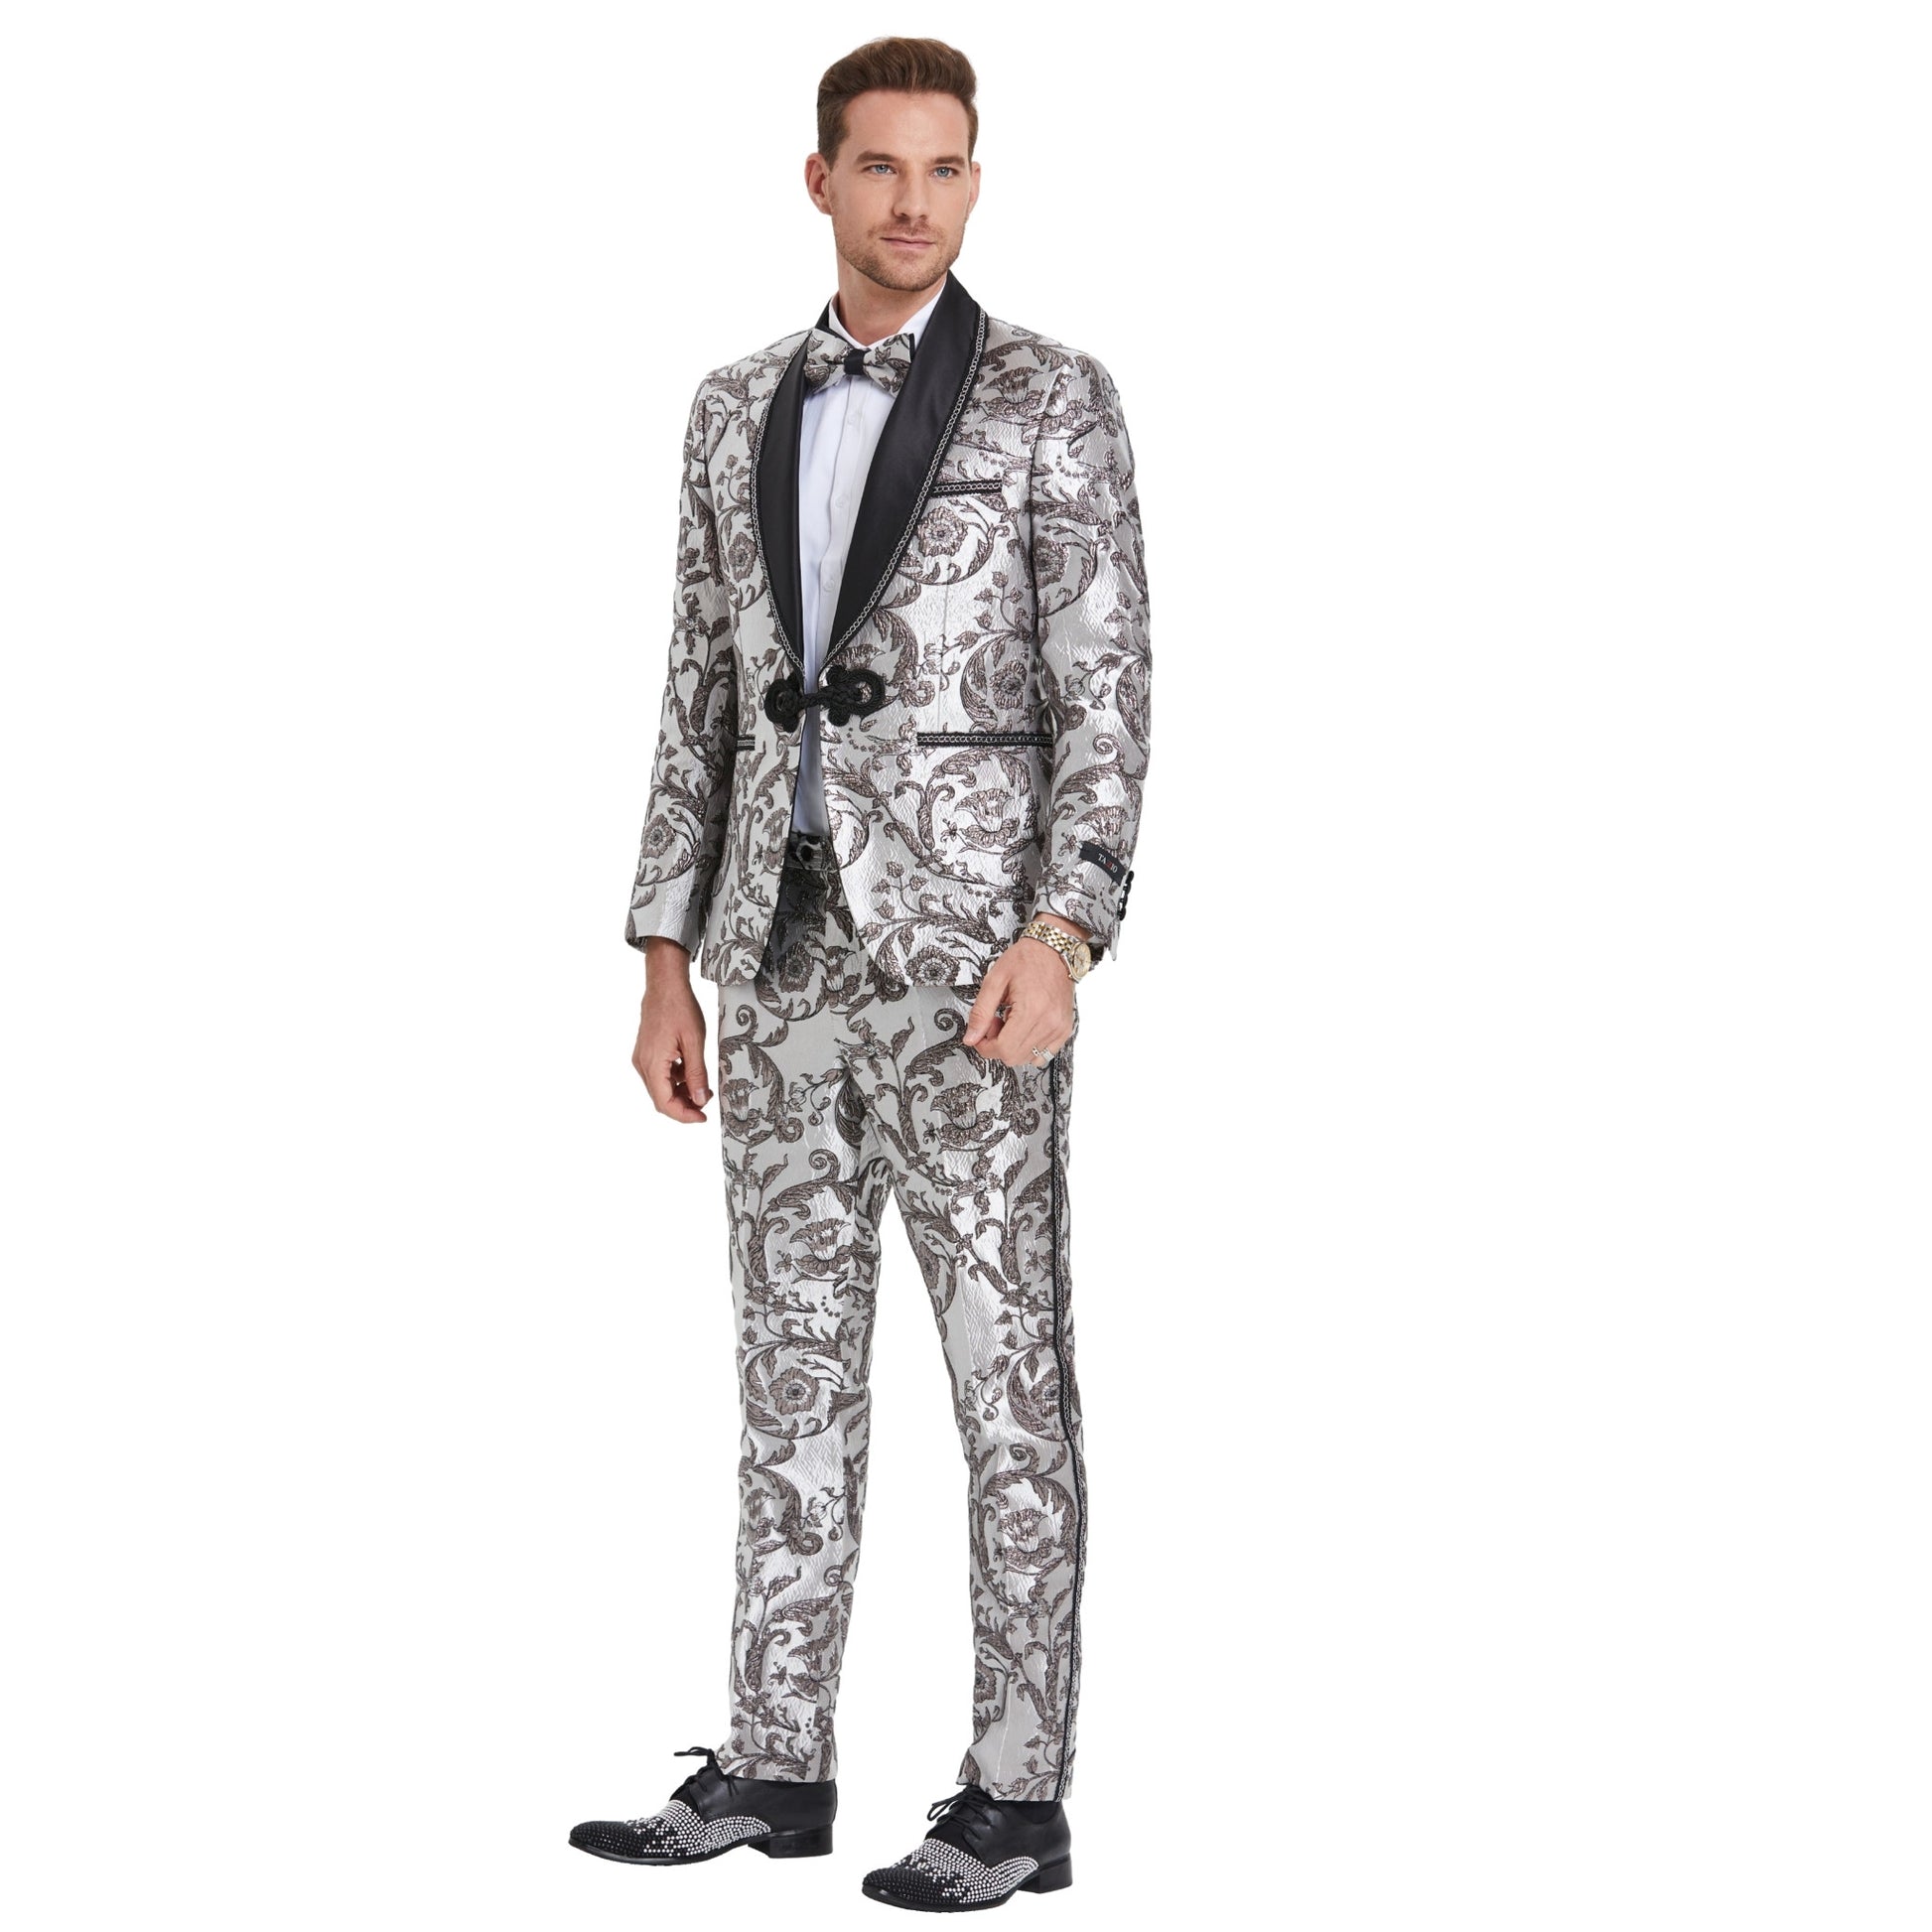 Shiny Silver Tuxedo with Black Paisley, Silver Paisley Design Pants, Black and Silver Lapel Detail, Shiny Silver Paisley Bowtie, Slim Fit Tuxedo Style.